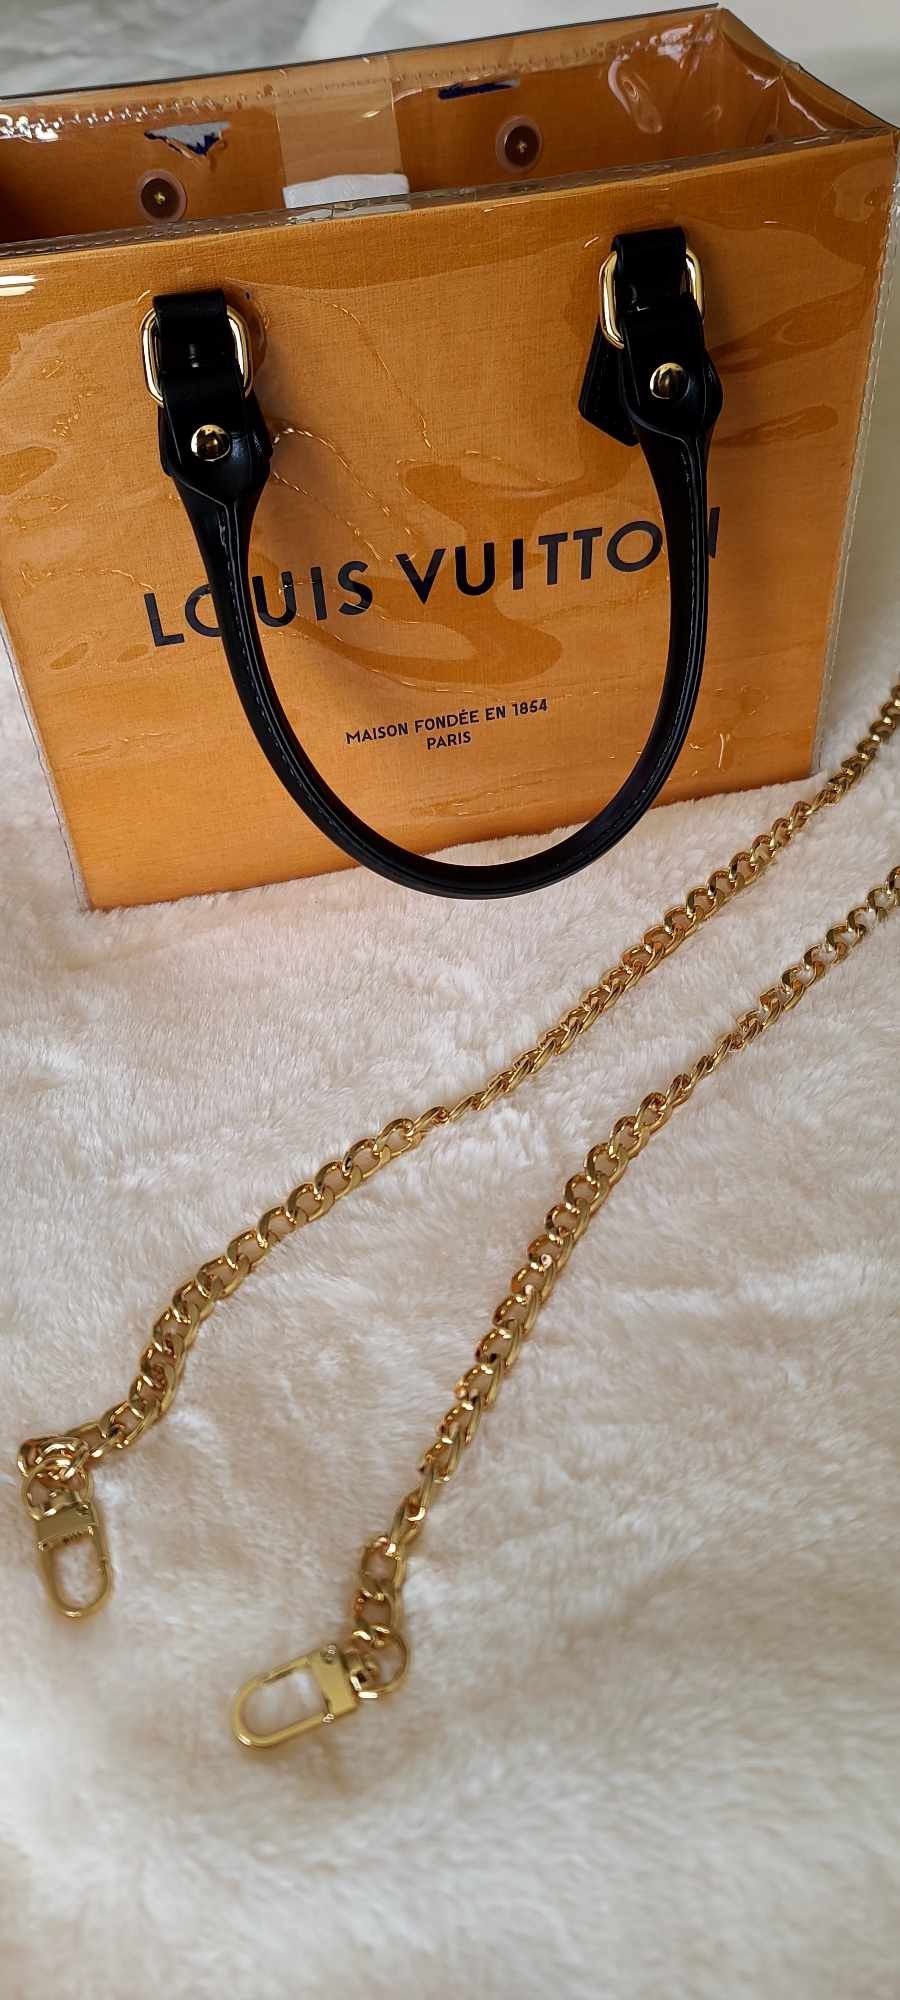 LOUIS VUITTON UPCYCLED PAPER BAG 